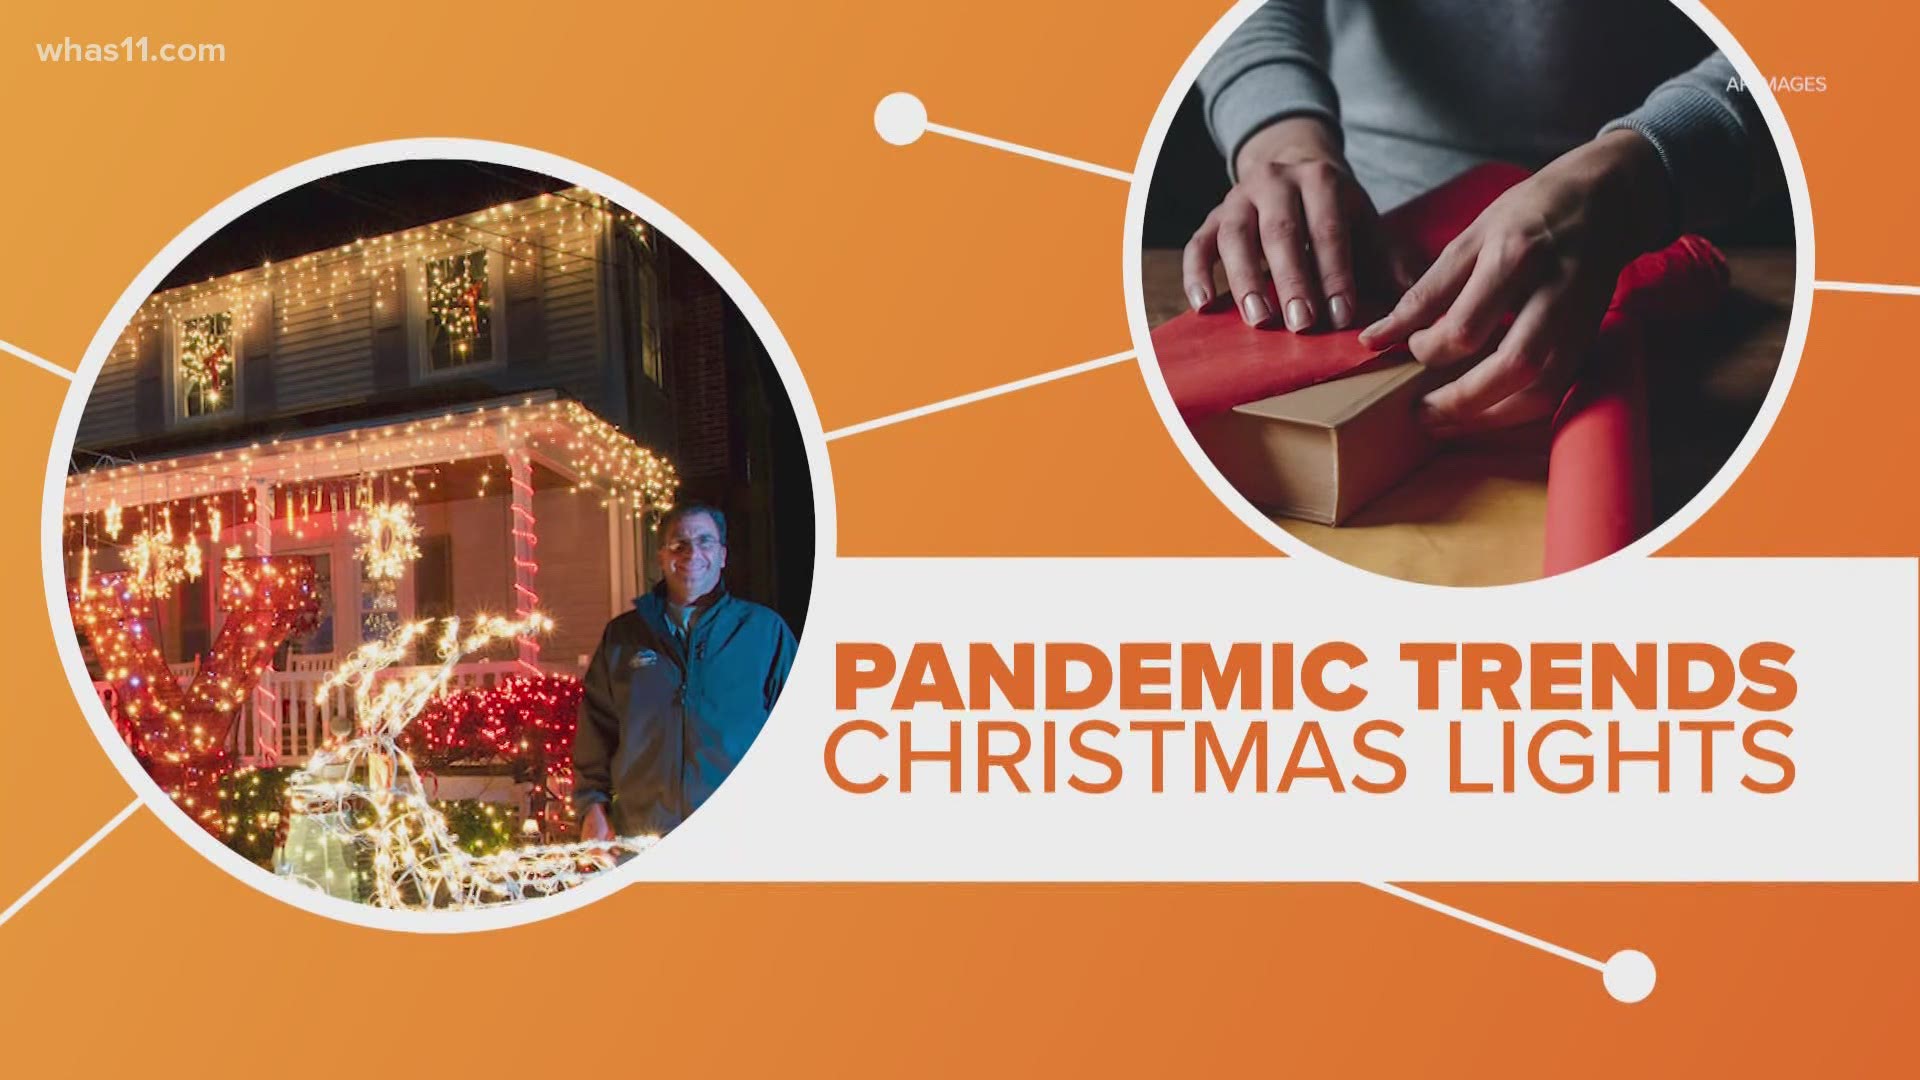 Sales of some holiday decorations started back in August, and some supplier cut down on their orders due to the pandemic.